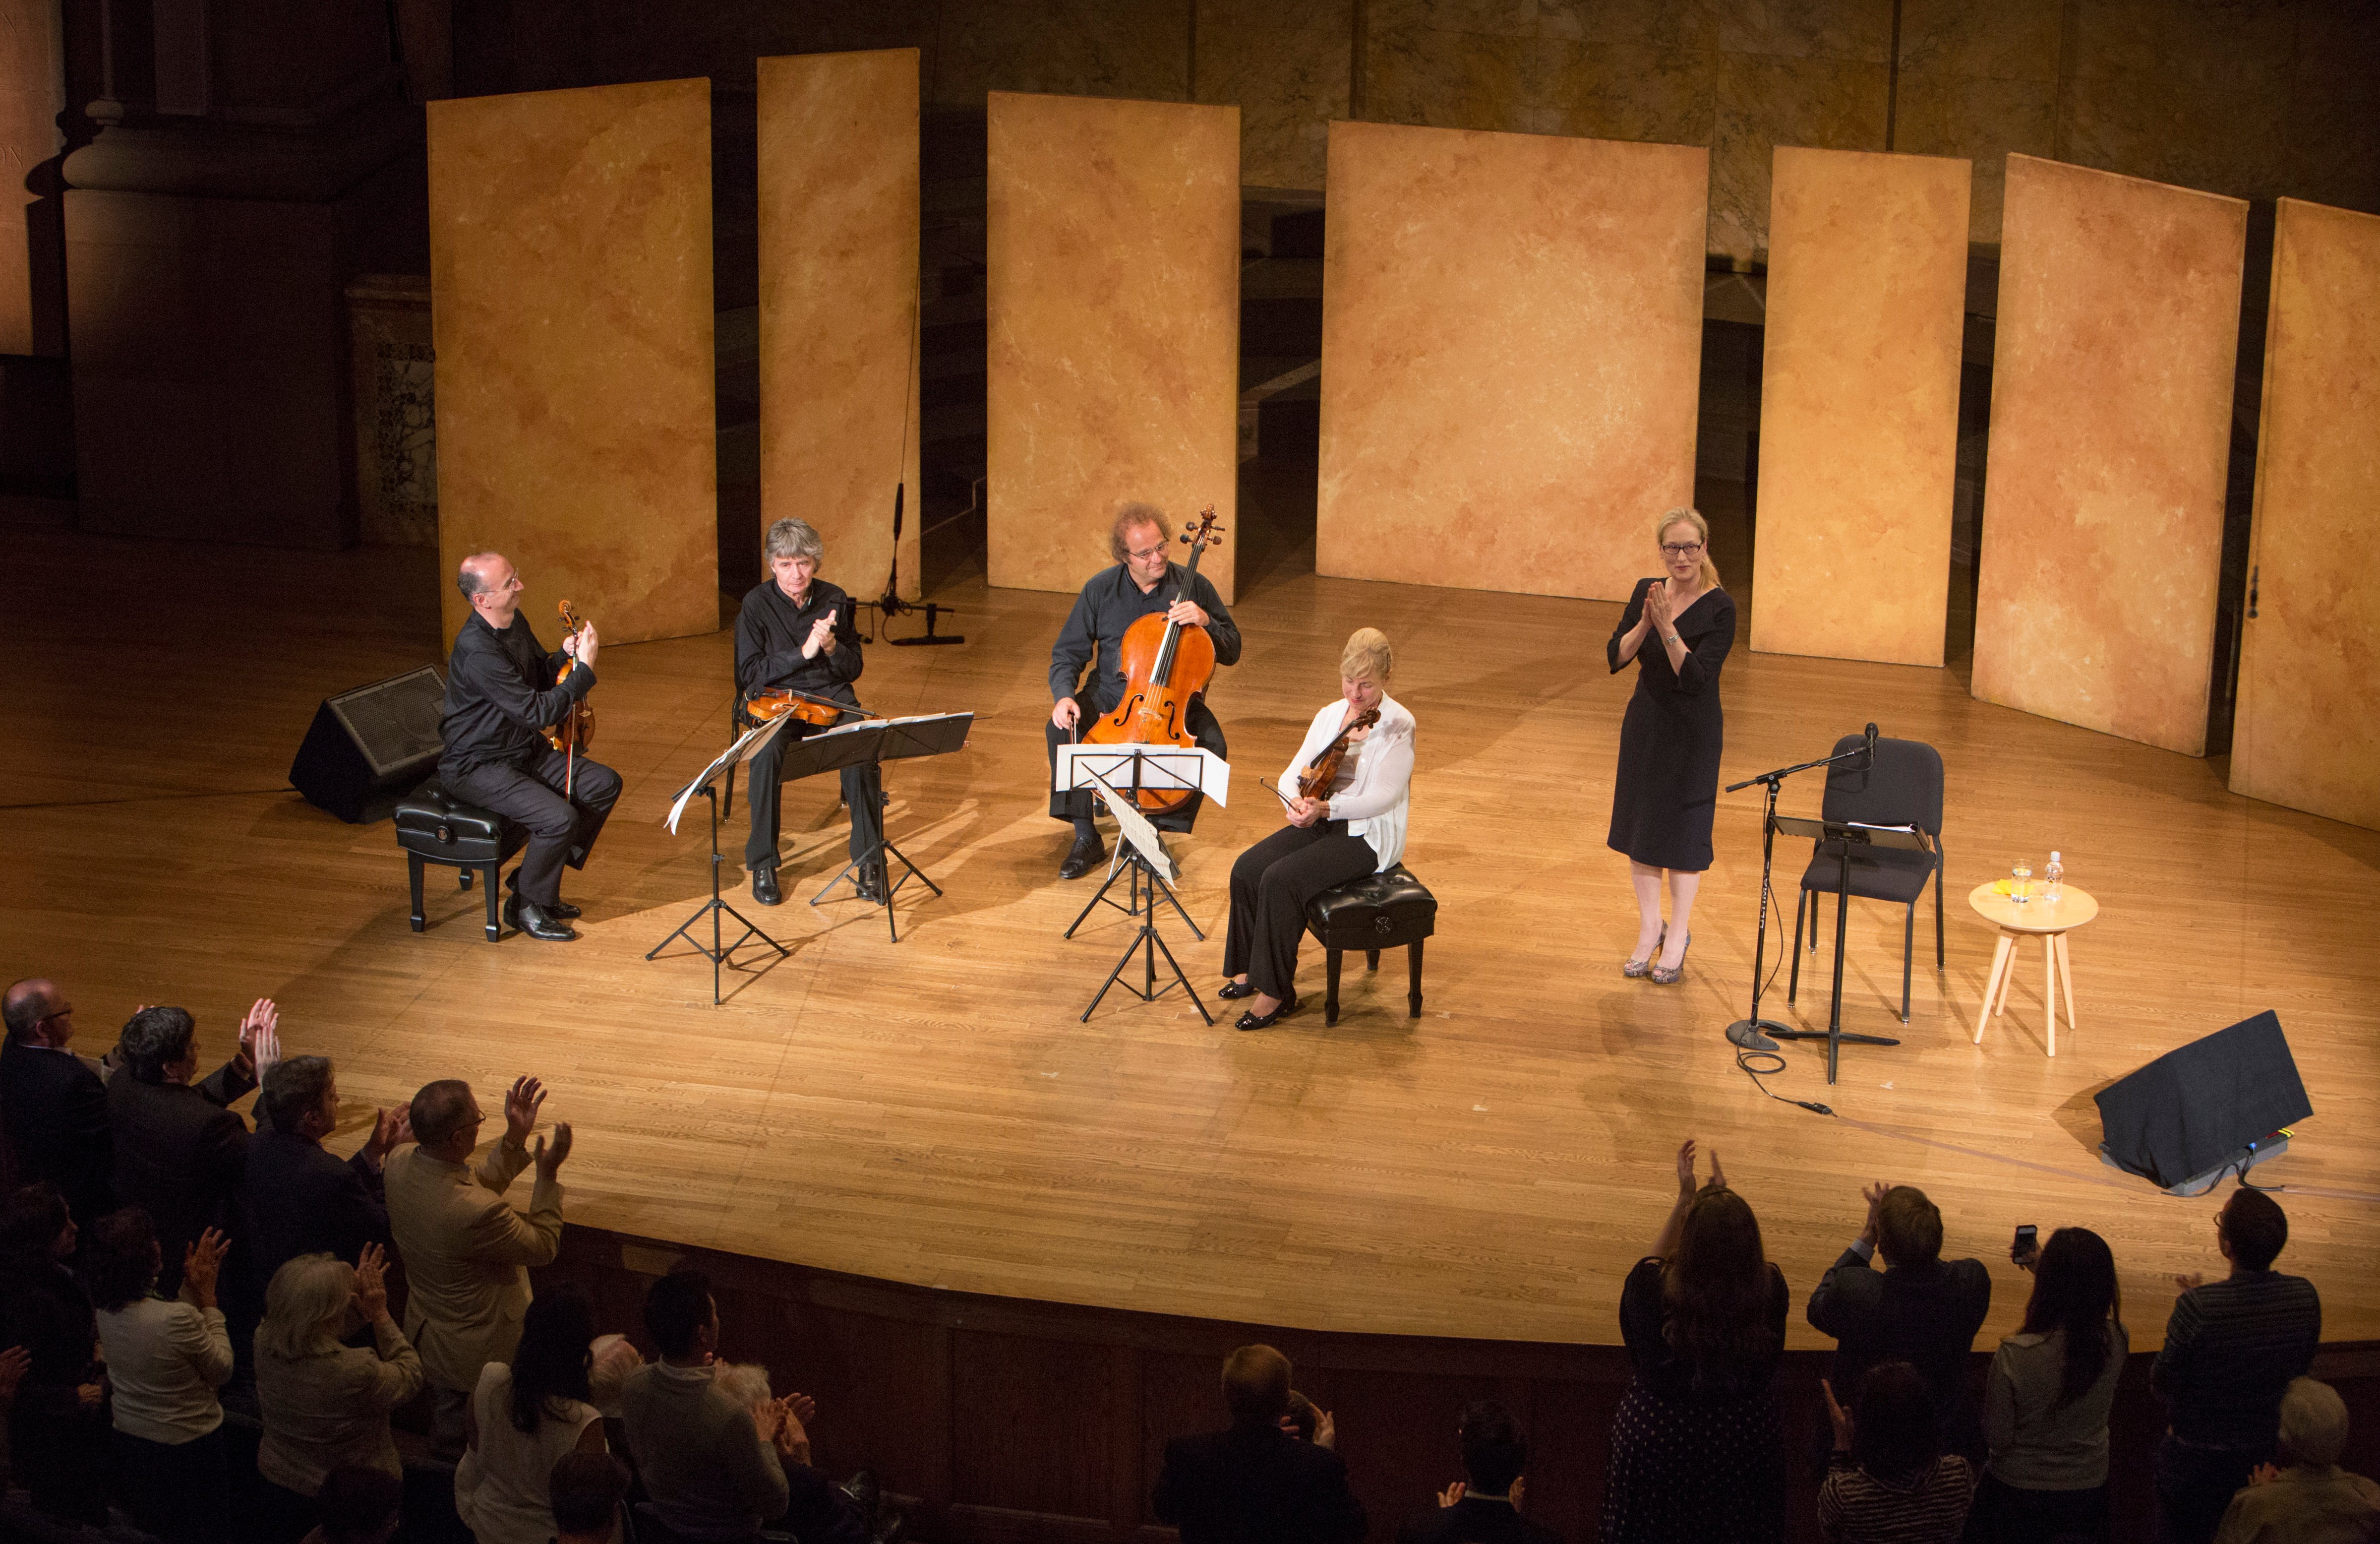 Meryl Streep and the Takacs String Quartet applaud Philip Roth, in the audience at an event presented by Princeton University Concerts. (Denise Applewhite&mdash;Princeton University Office of Communications)